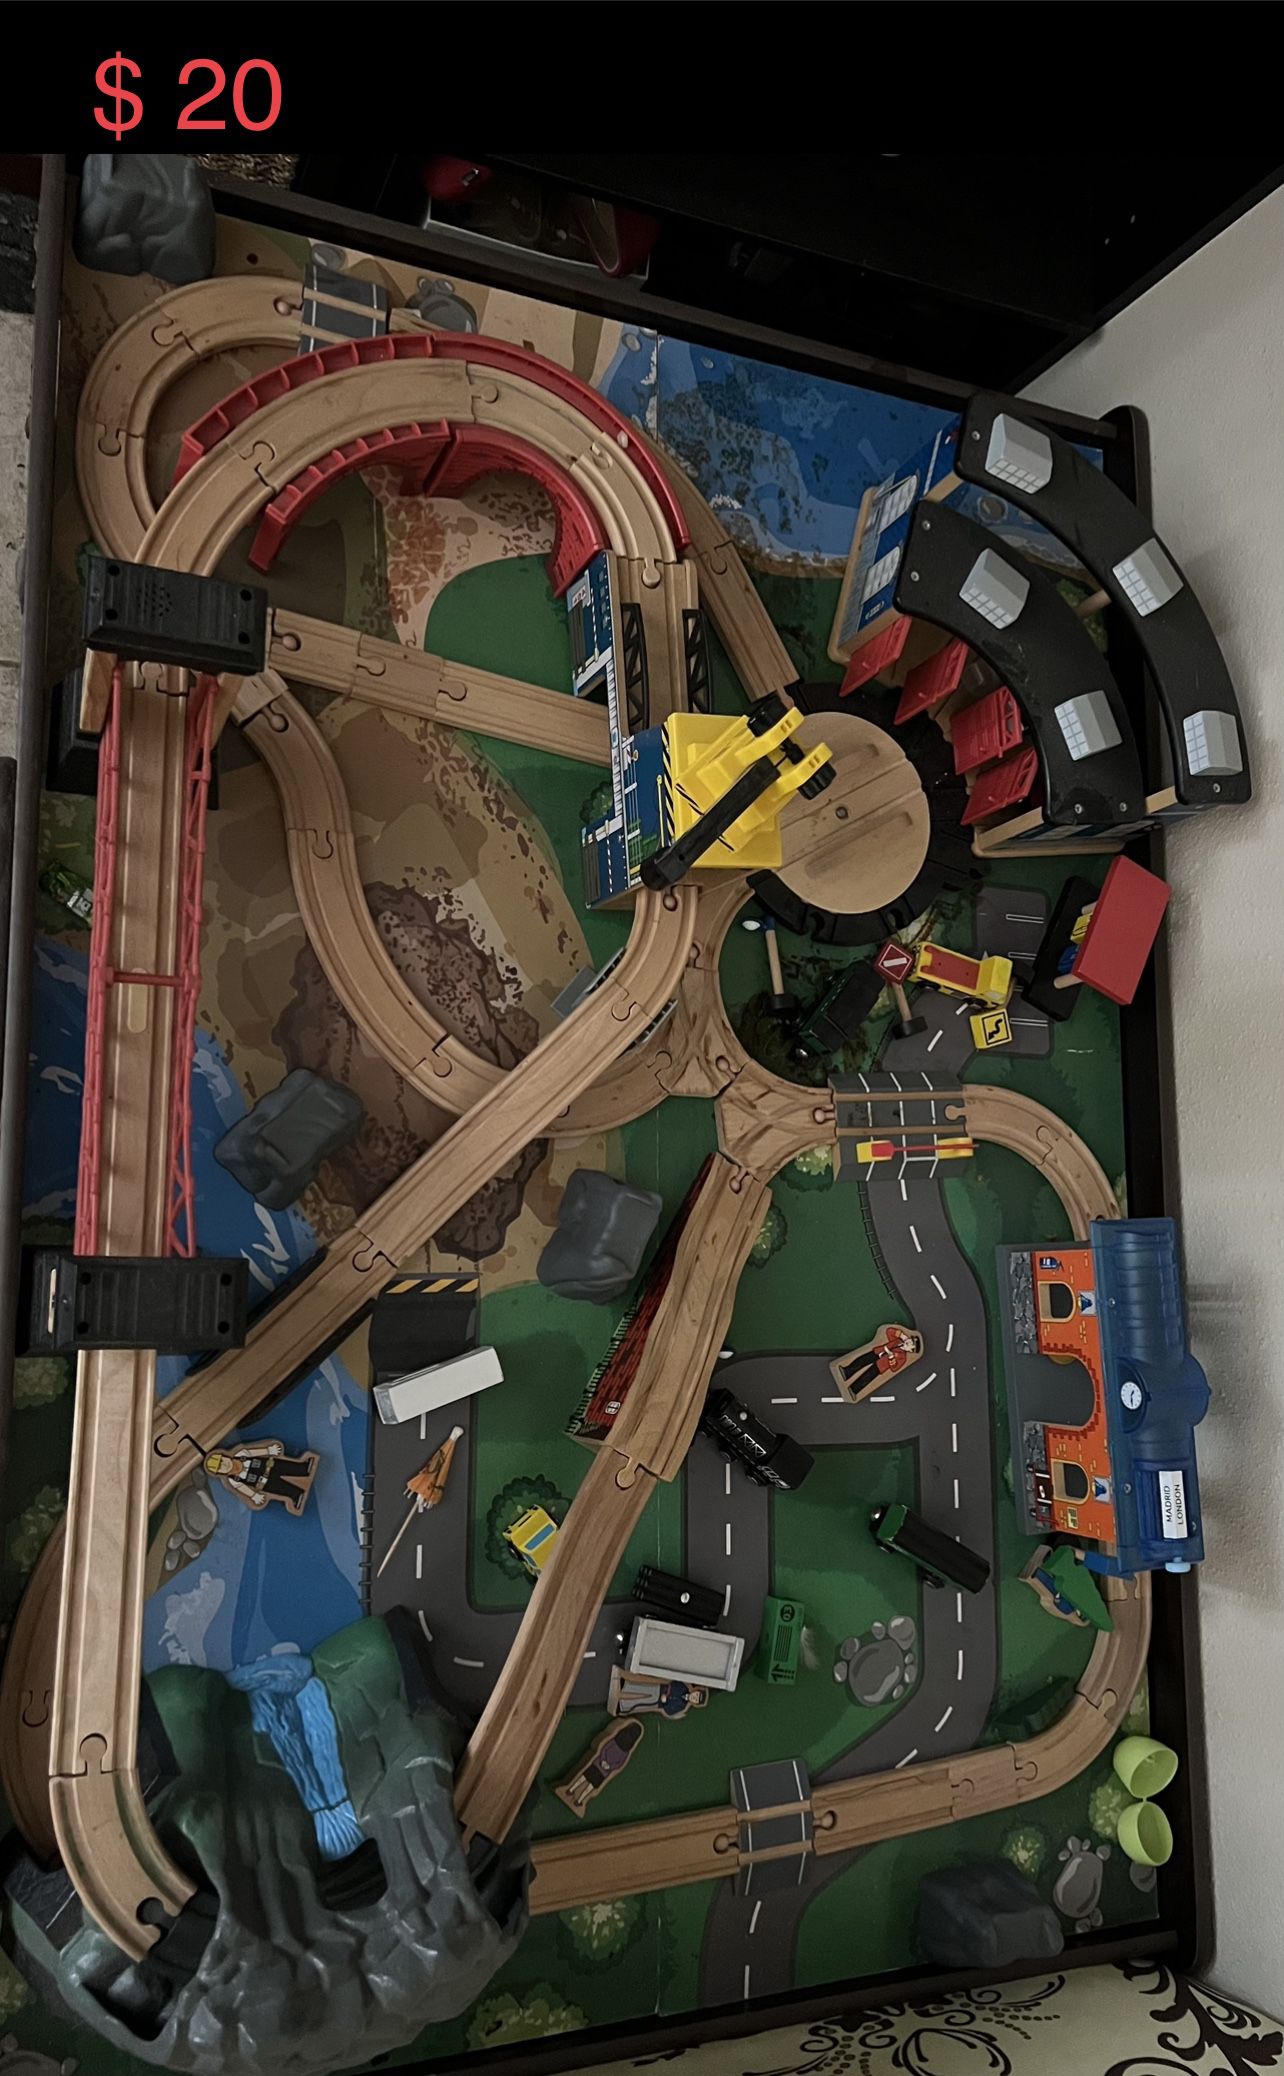 Train Table For Kids, $20